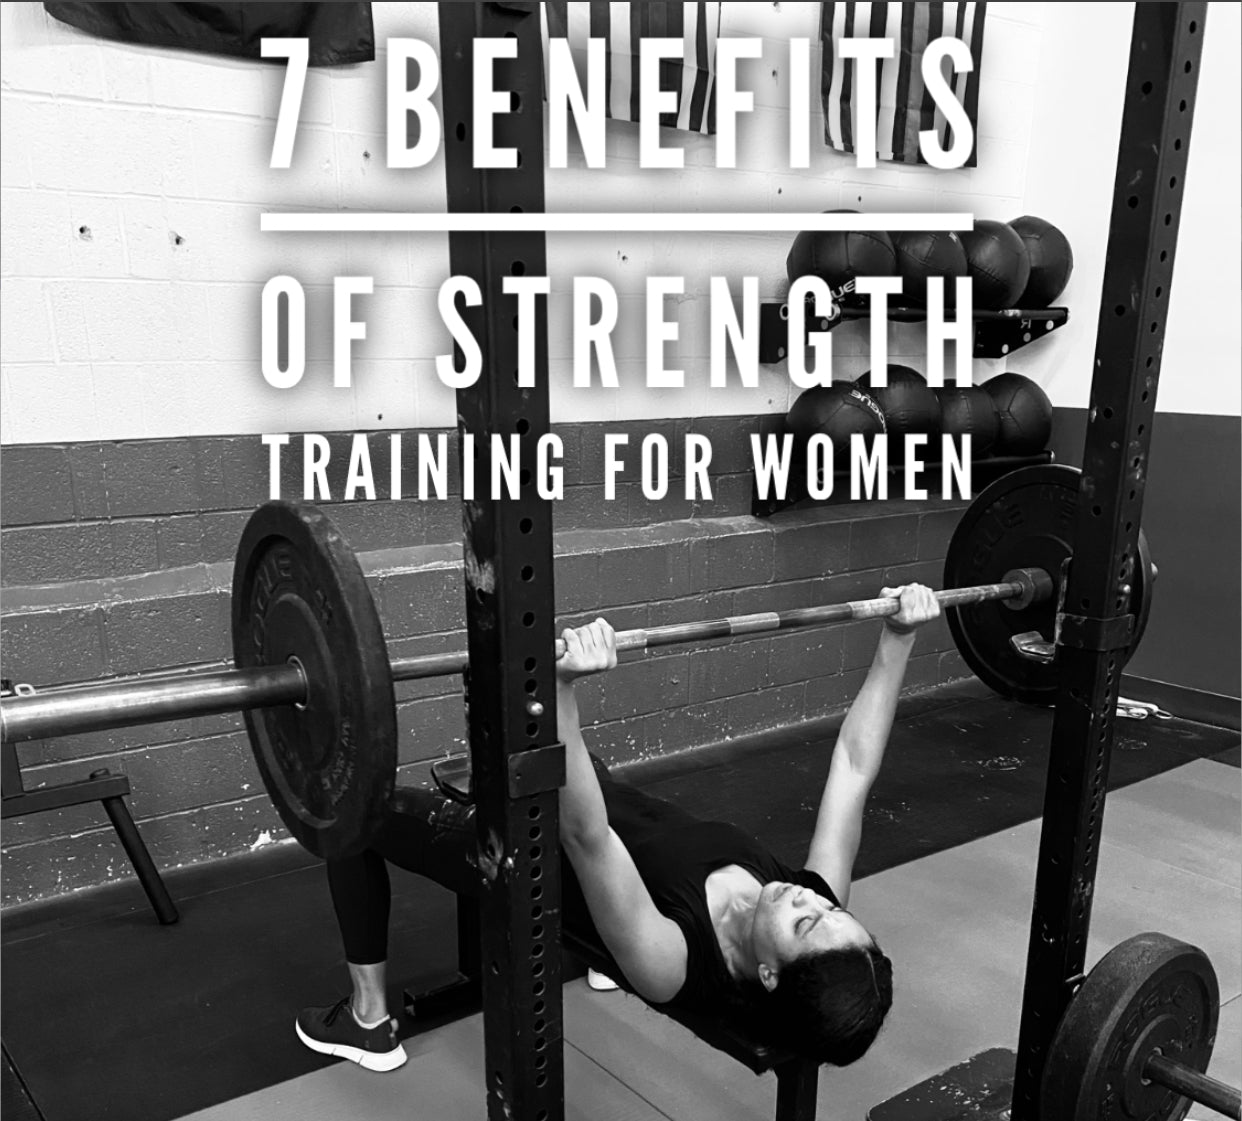 7 Benefits of Lifting Weights for Women